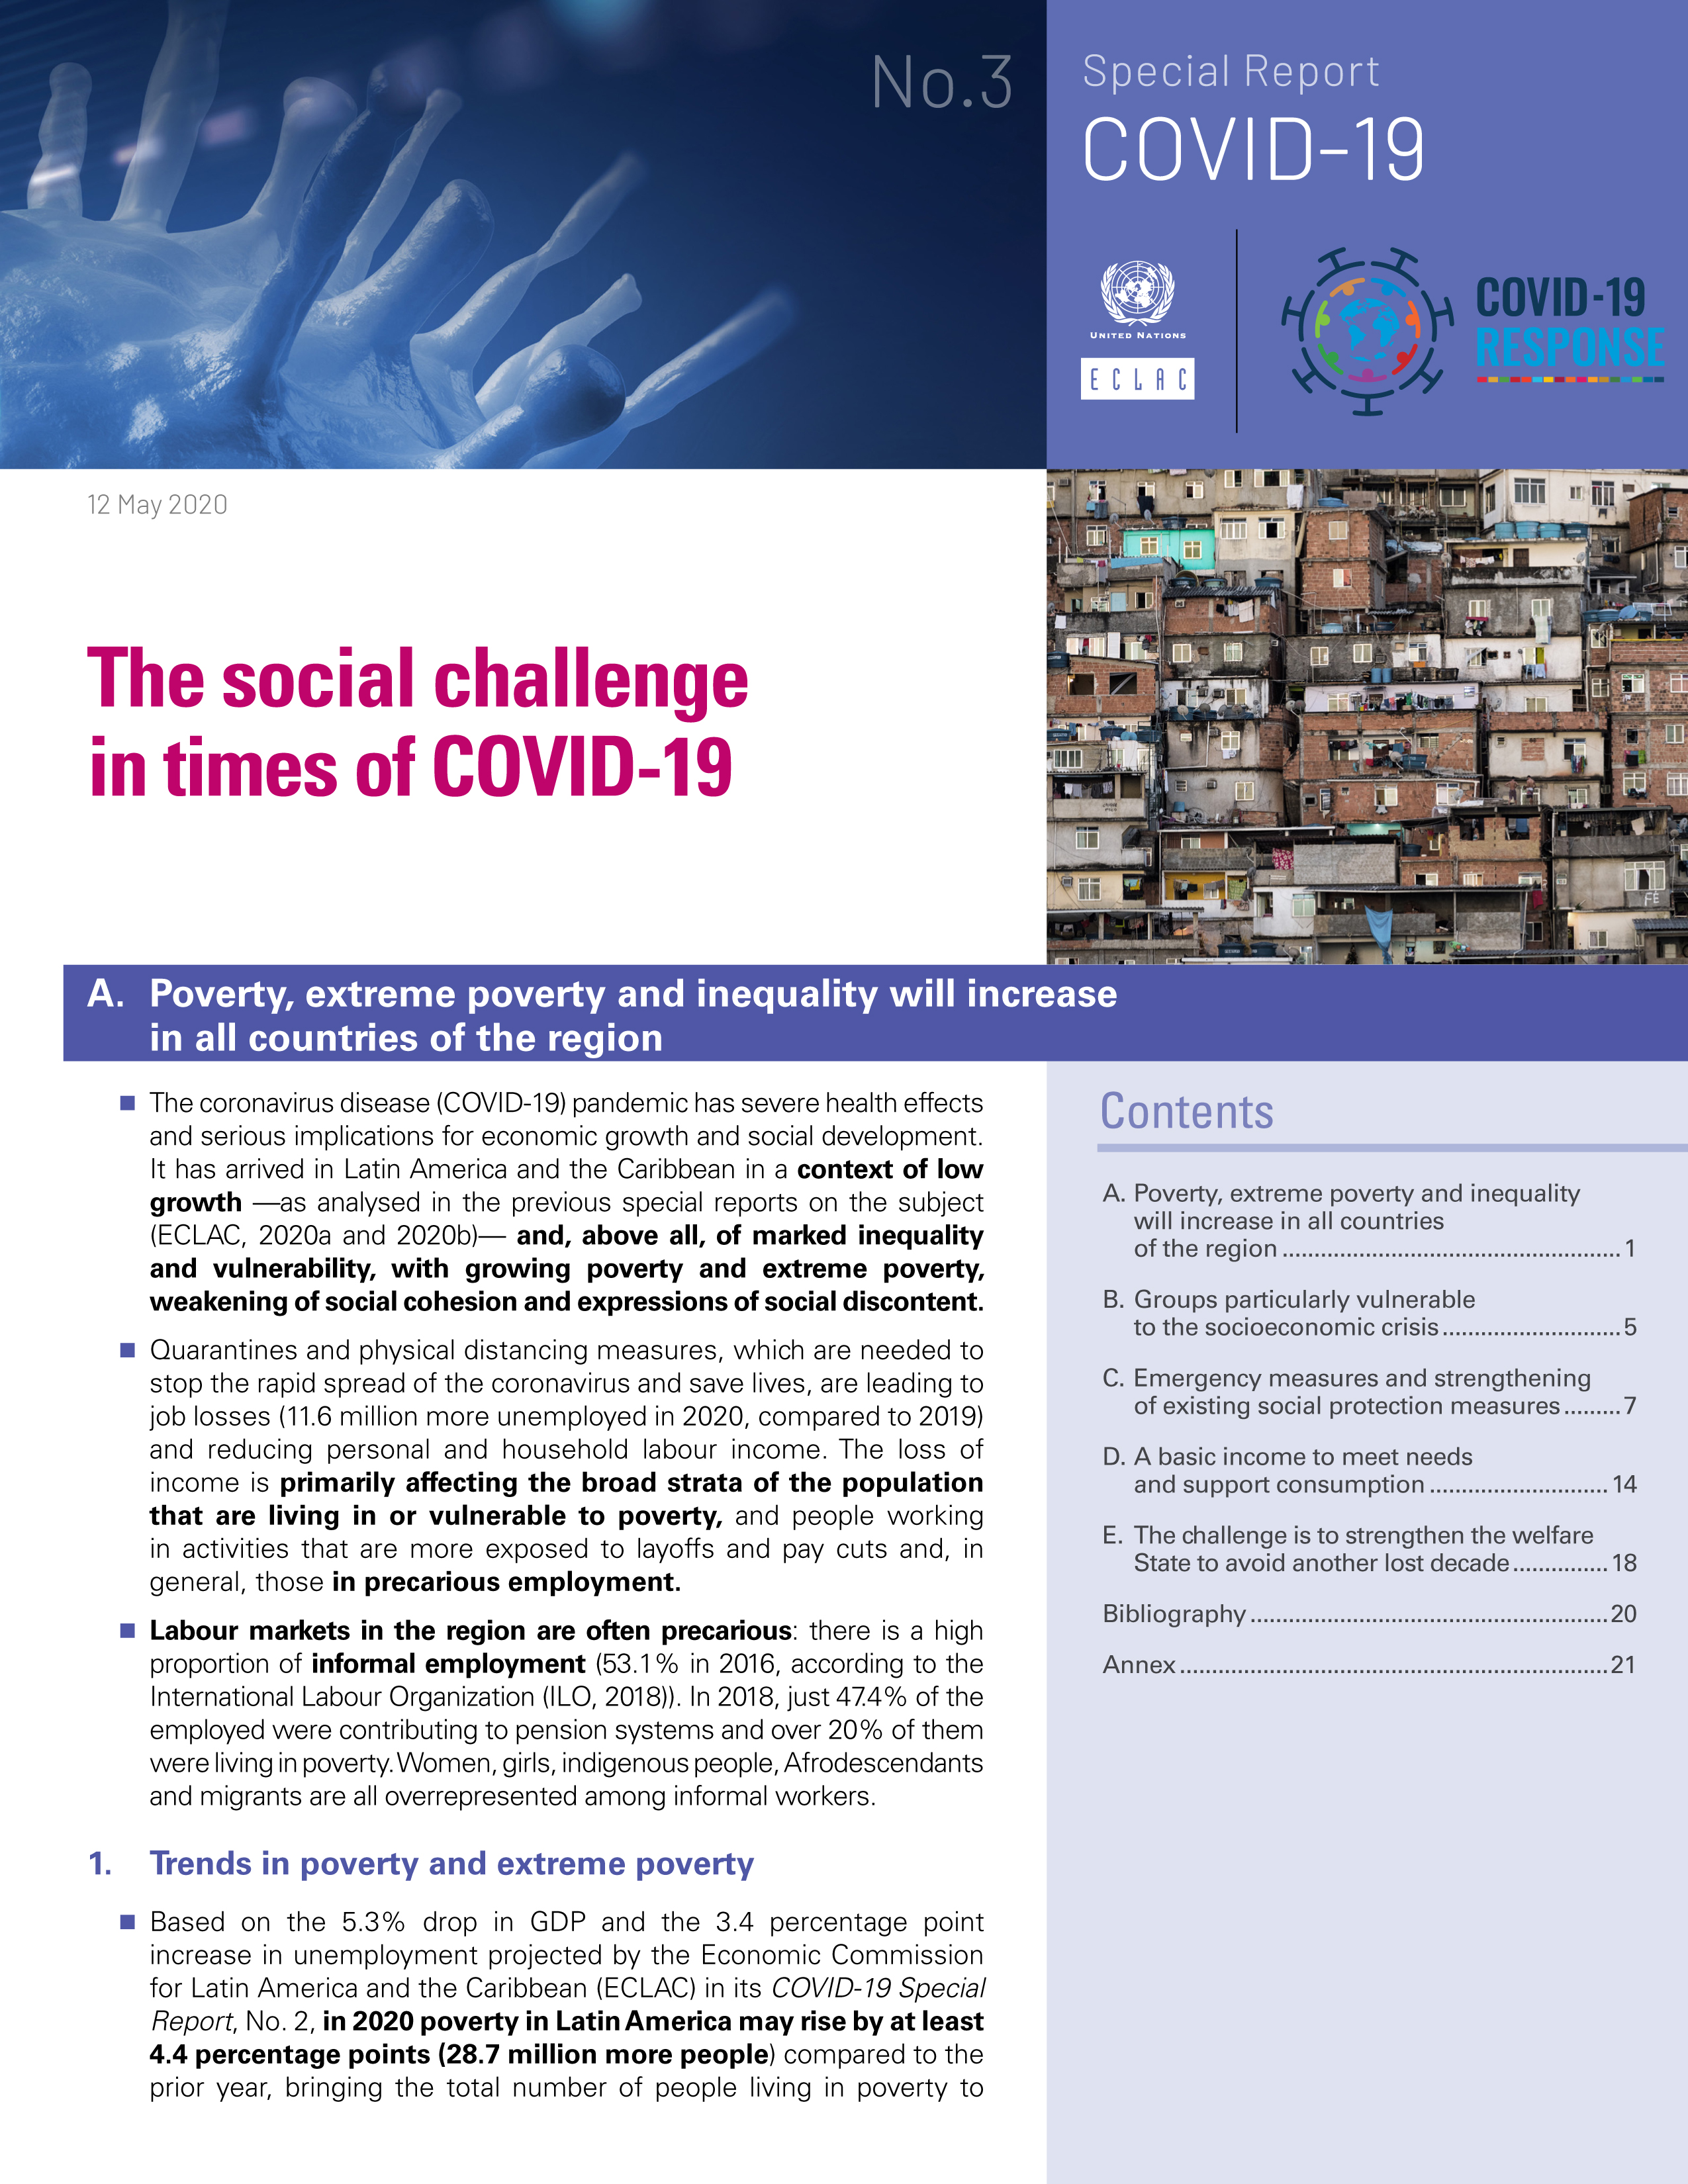 image of The Social Challenge in Times of COVID-19